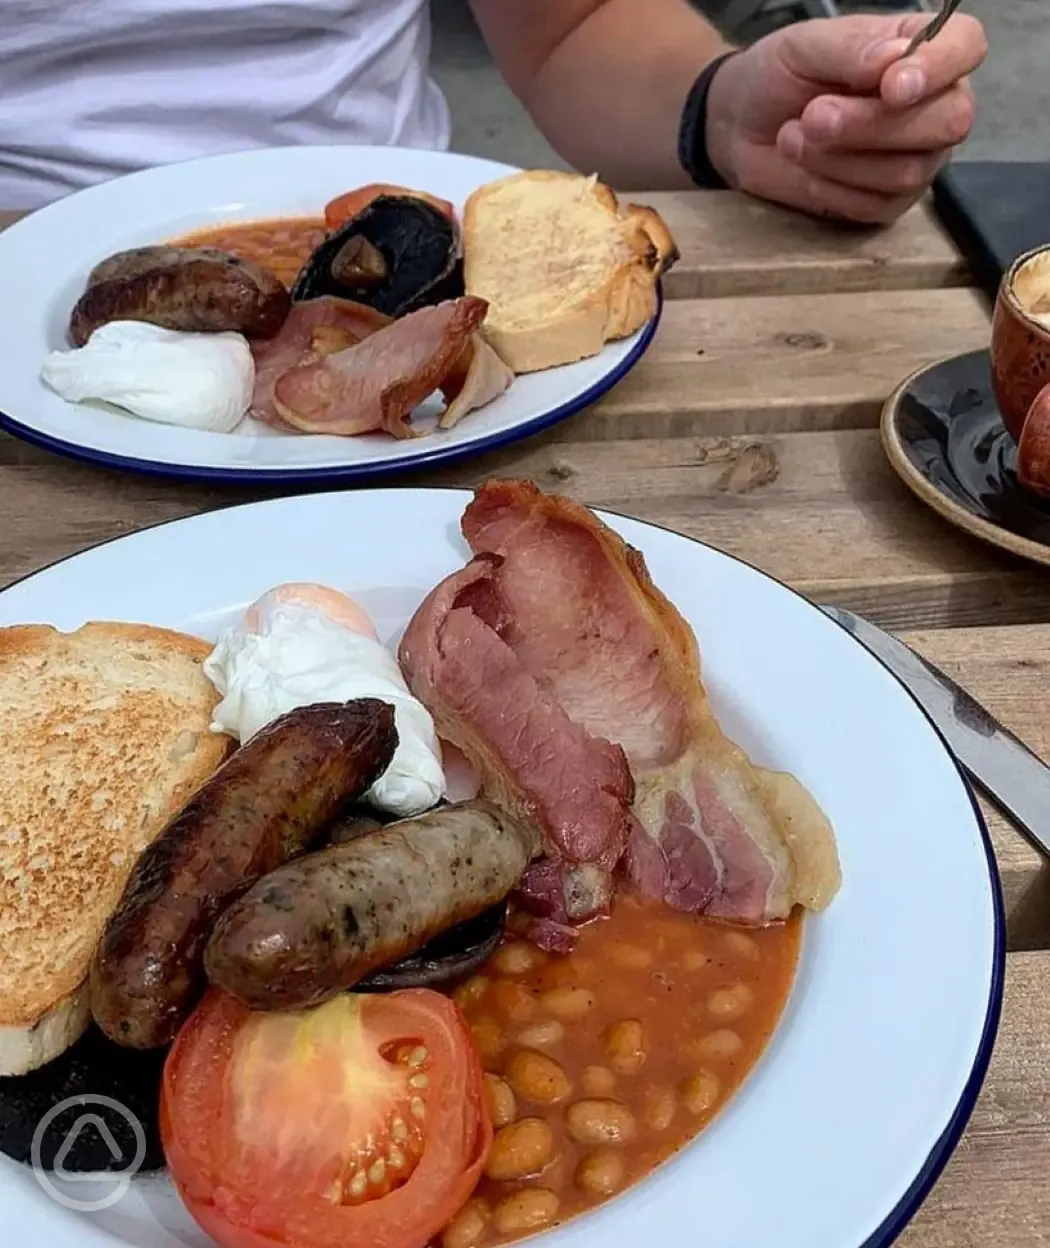 Full English breakfast at the cafe